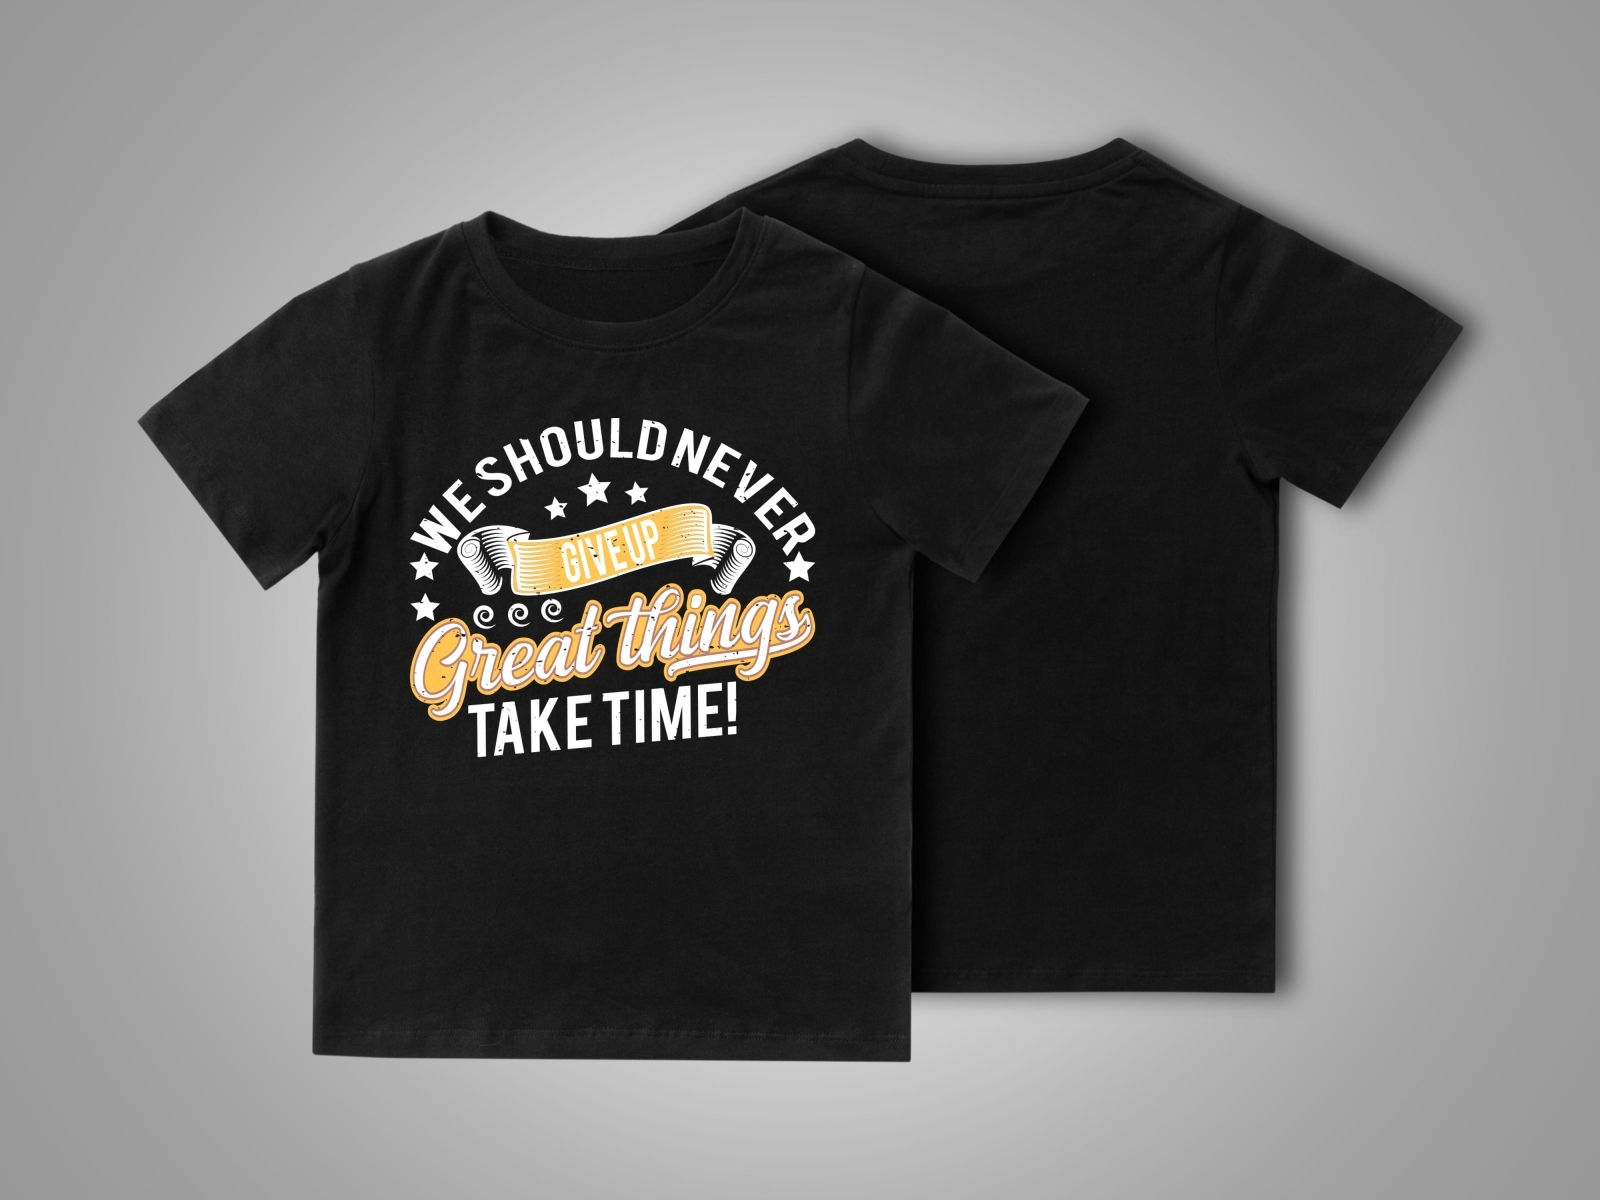 typography-t-shirt-design-typography-shirt-design-typography-by-mousumi-akter-on-dribbble